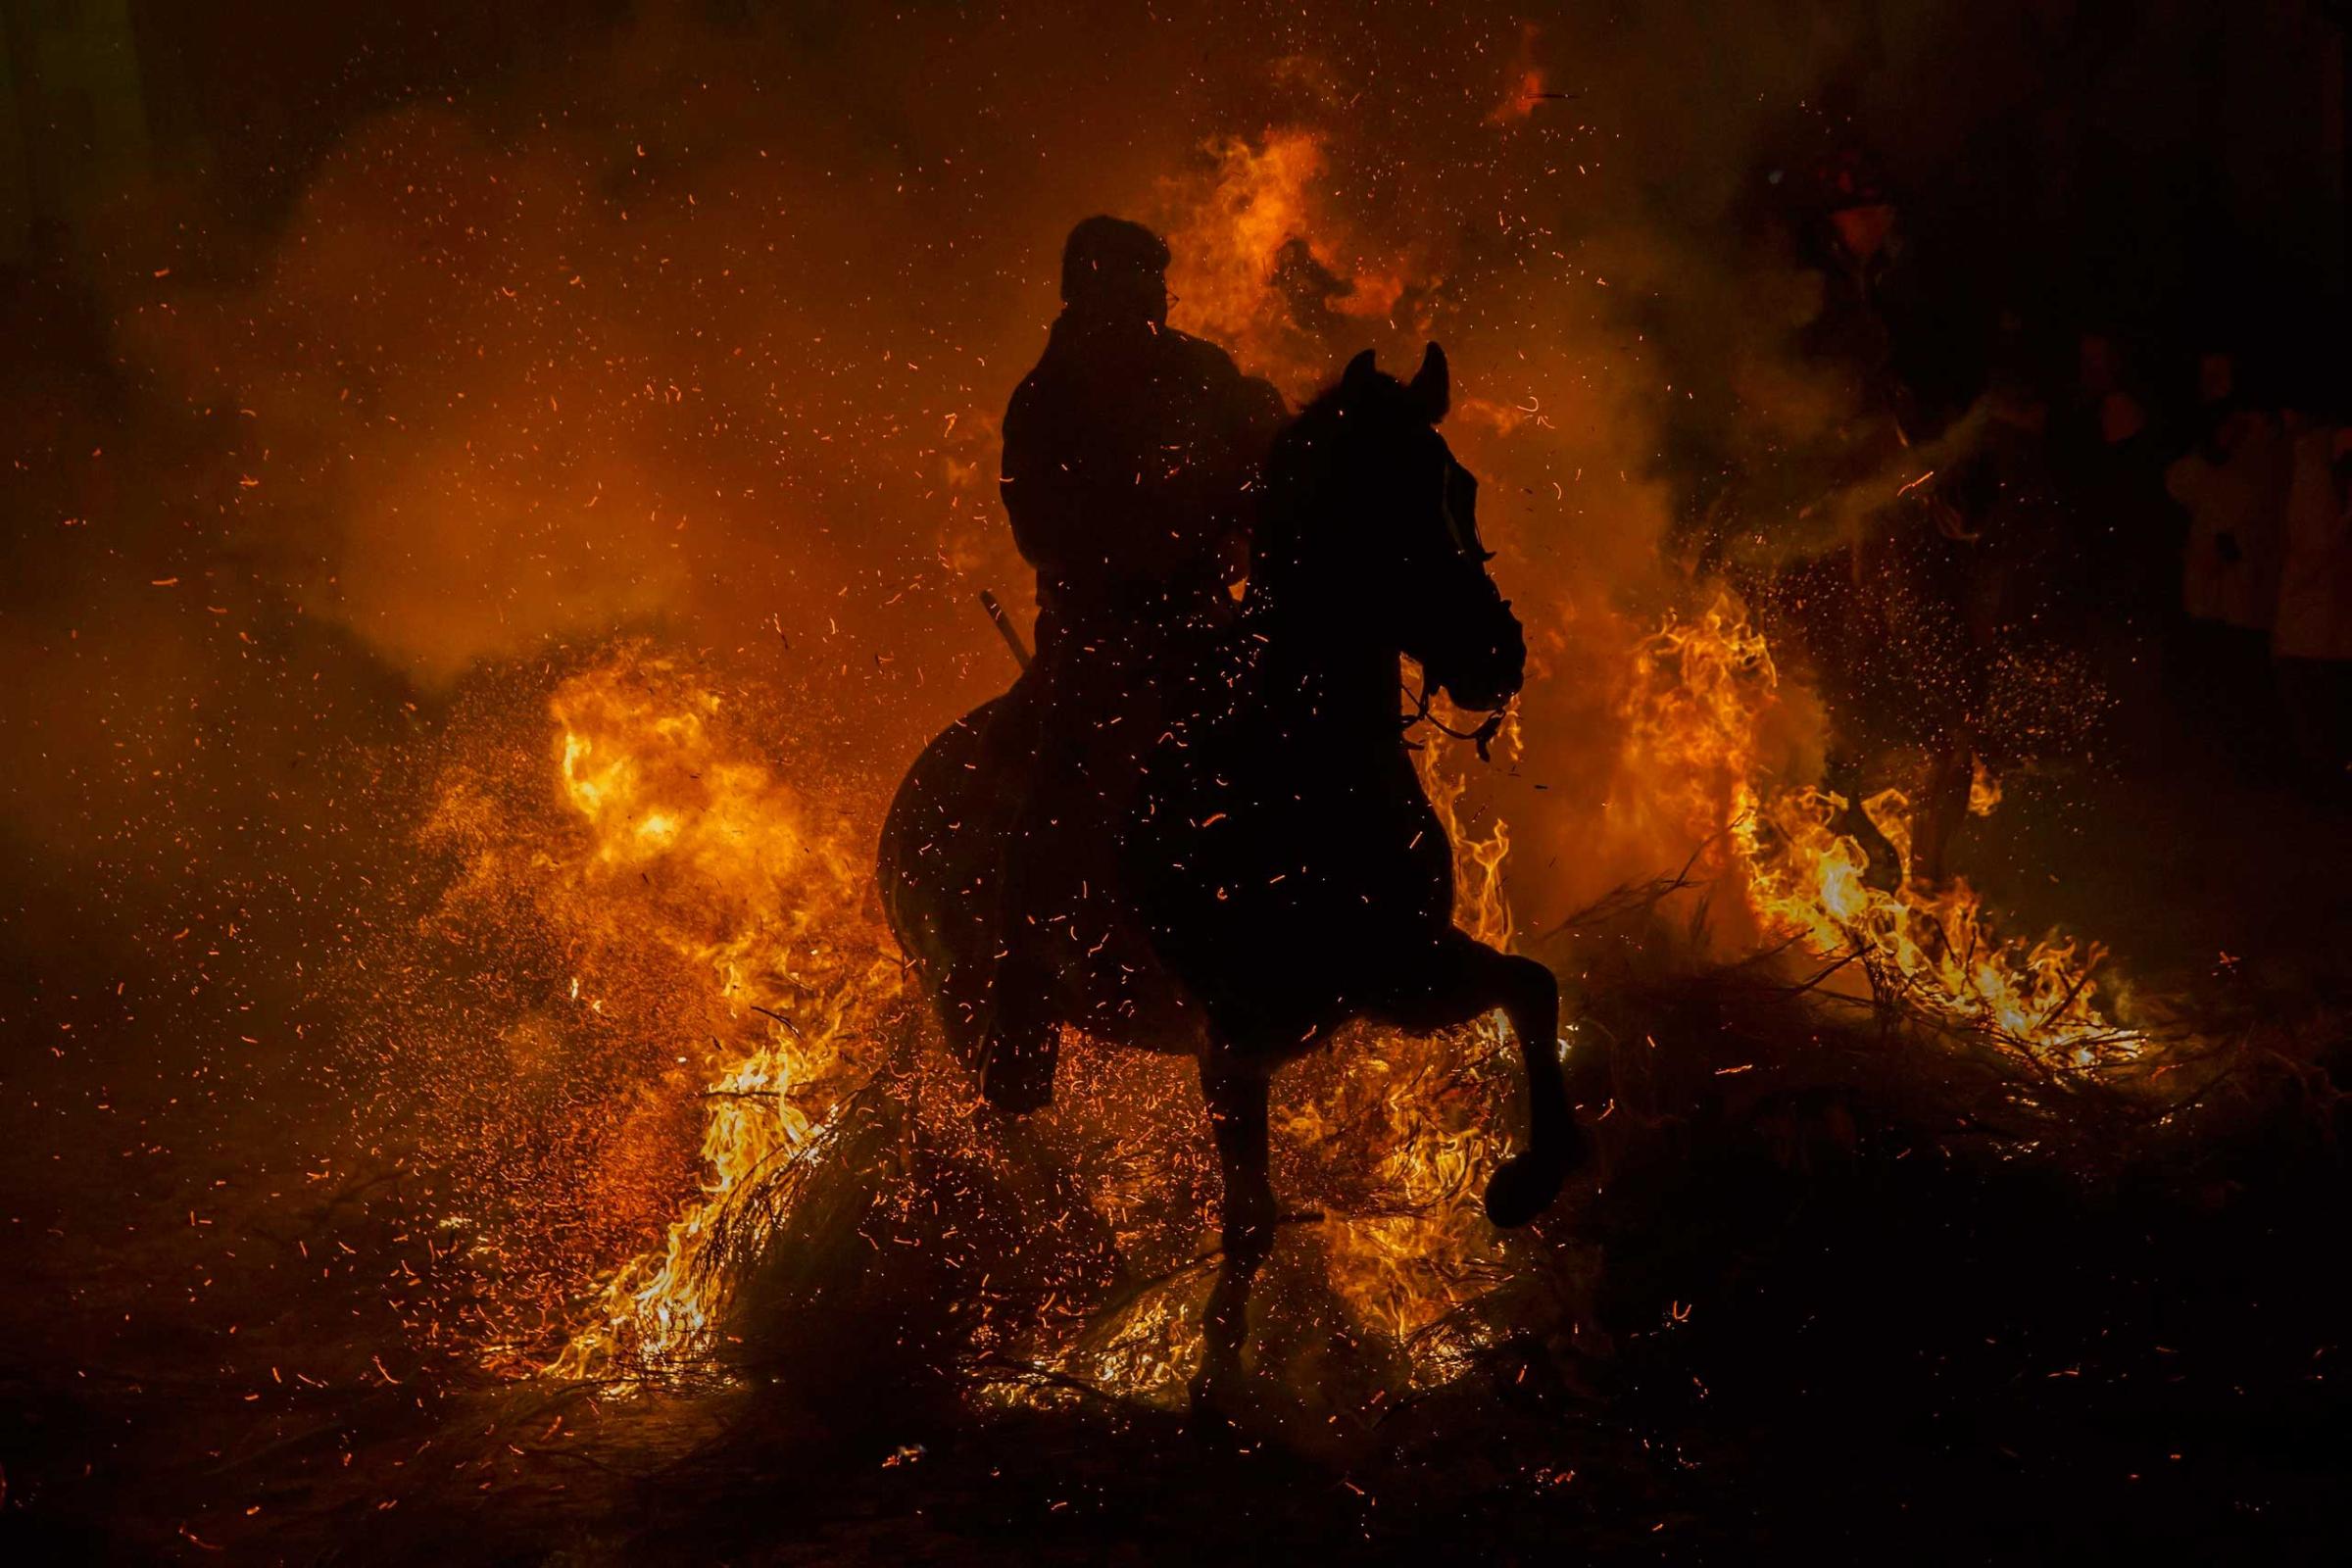 A man rides his horse through flames during the "Luminarias" annual religious celebration, on the night before Saint Anthony's, patron of animals, in the village of San Bartolome de los Pinares